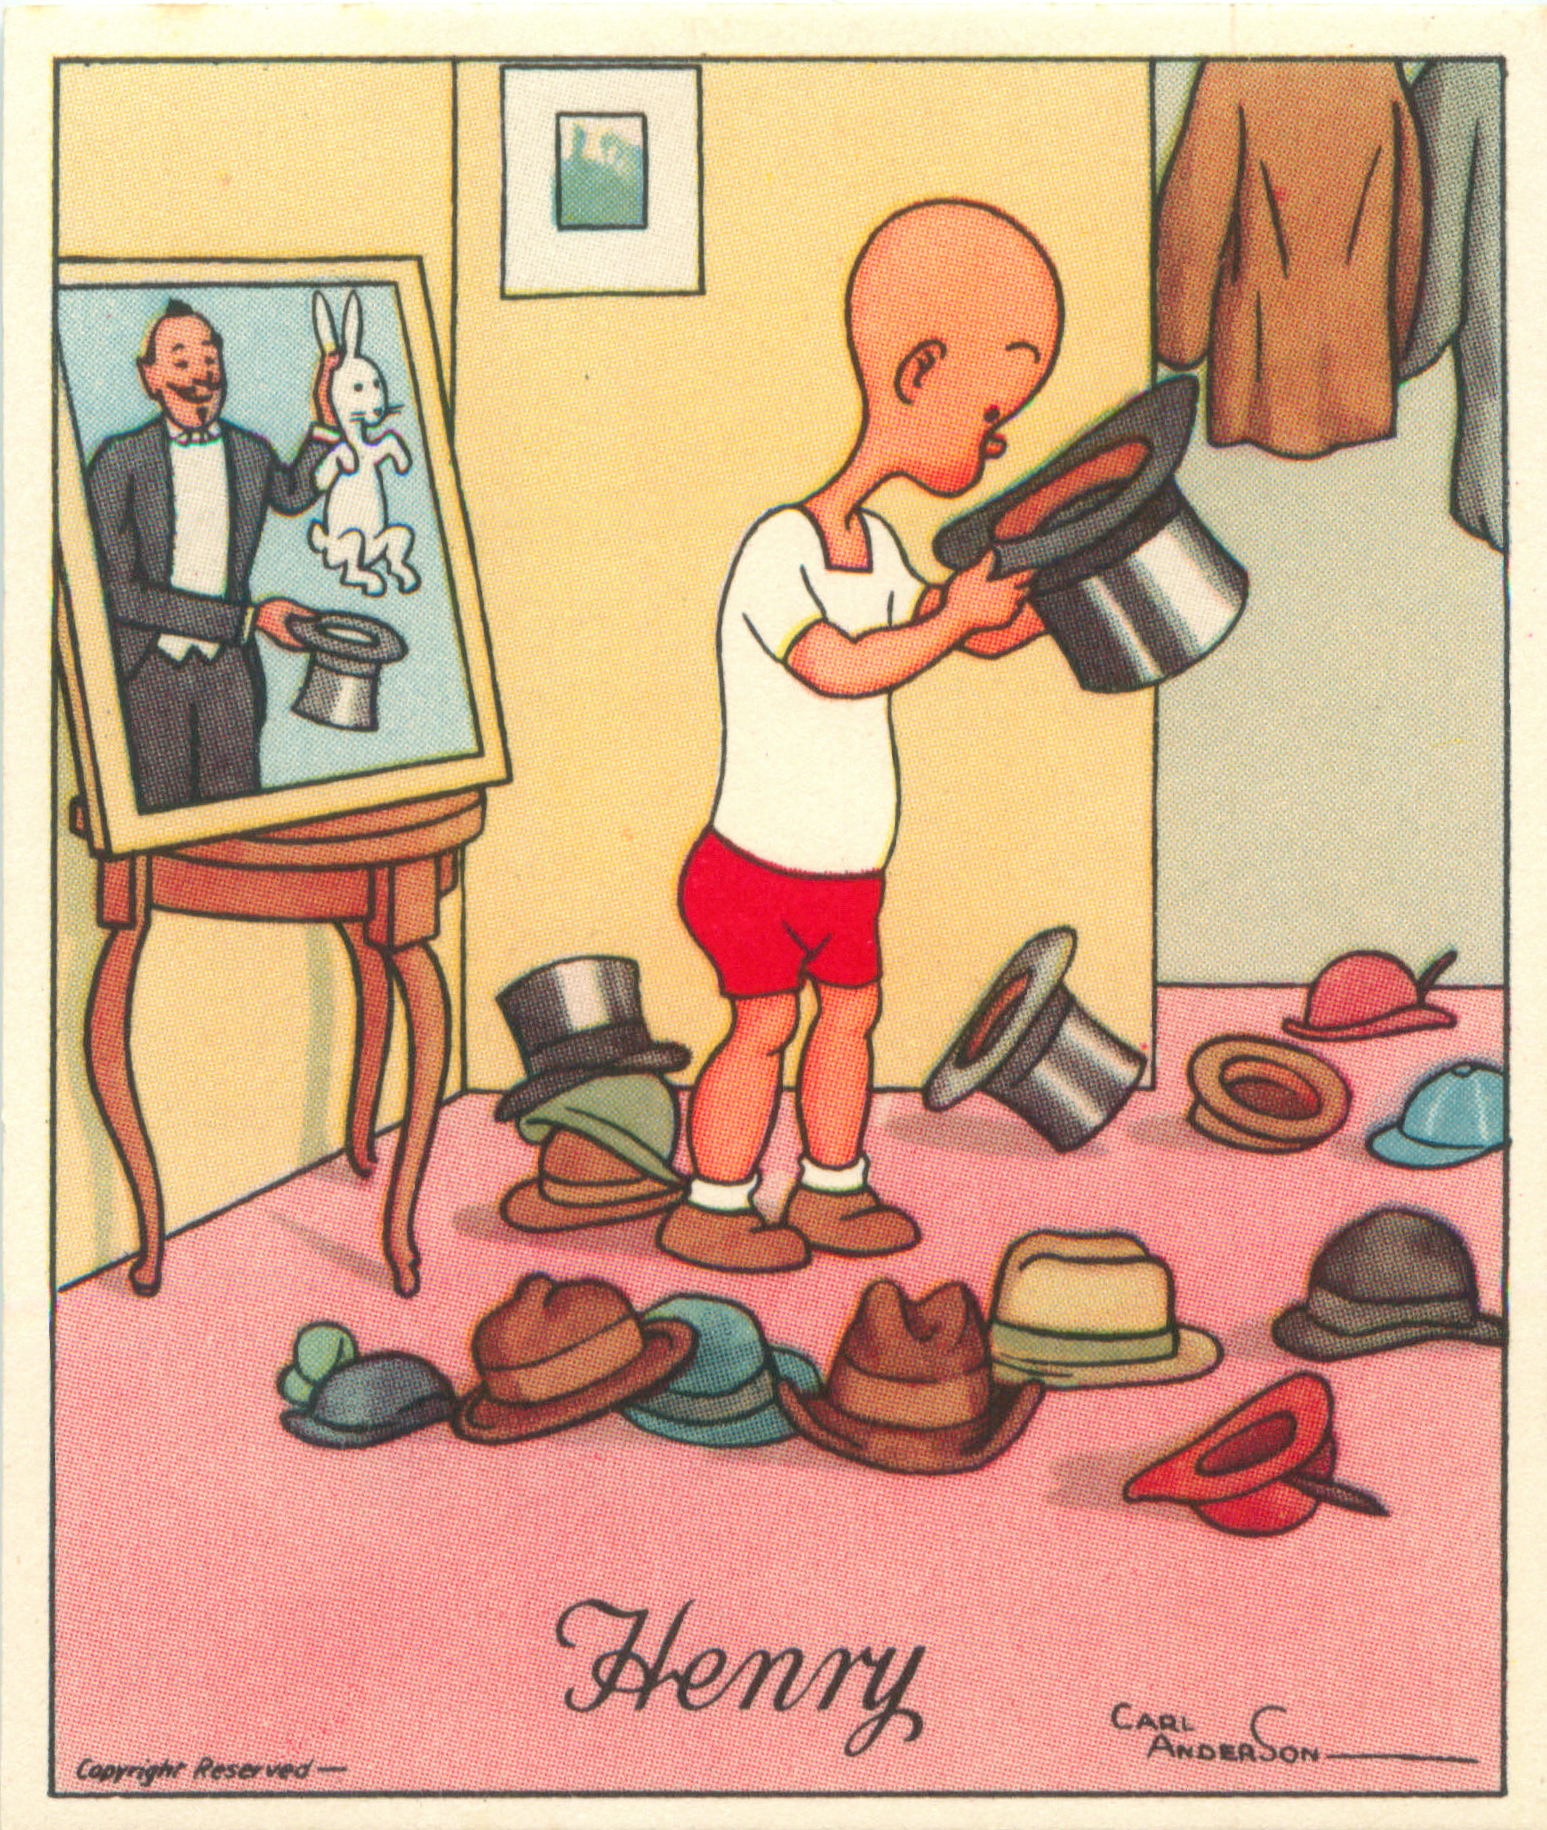 an image of a person putting the hat on a room floor